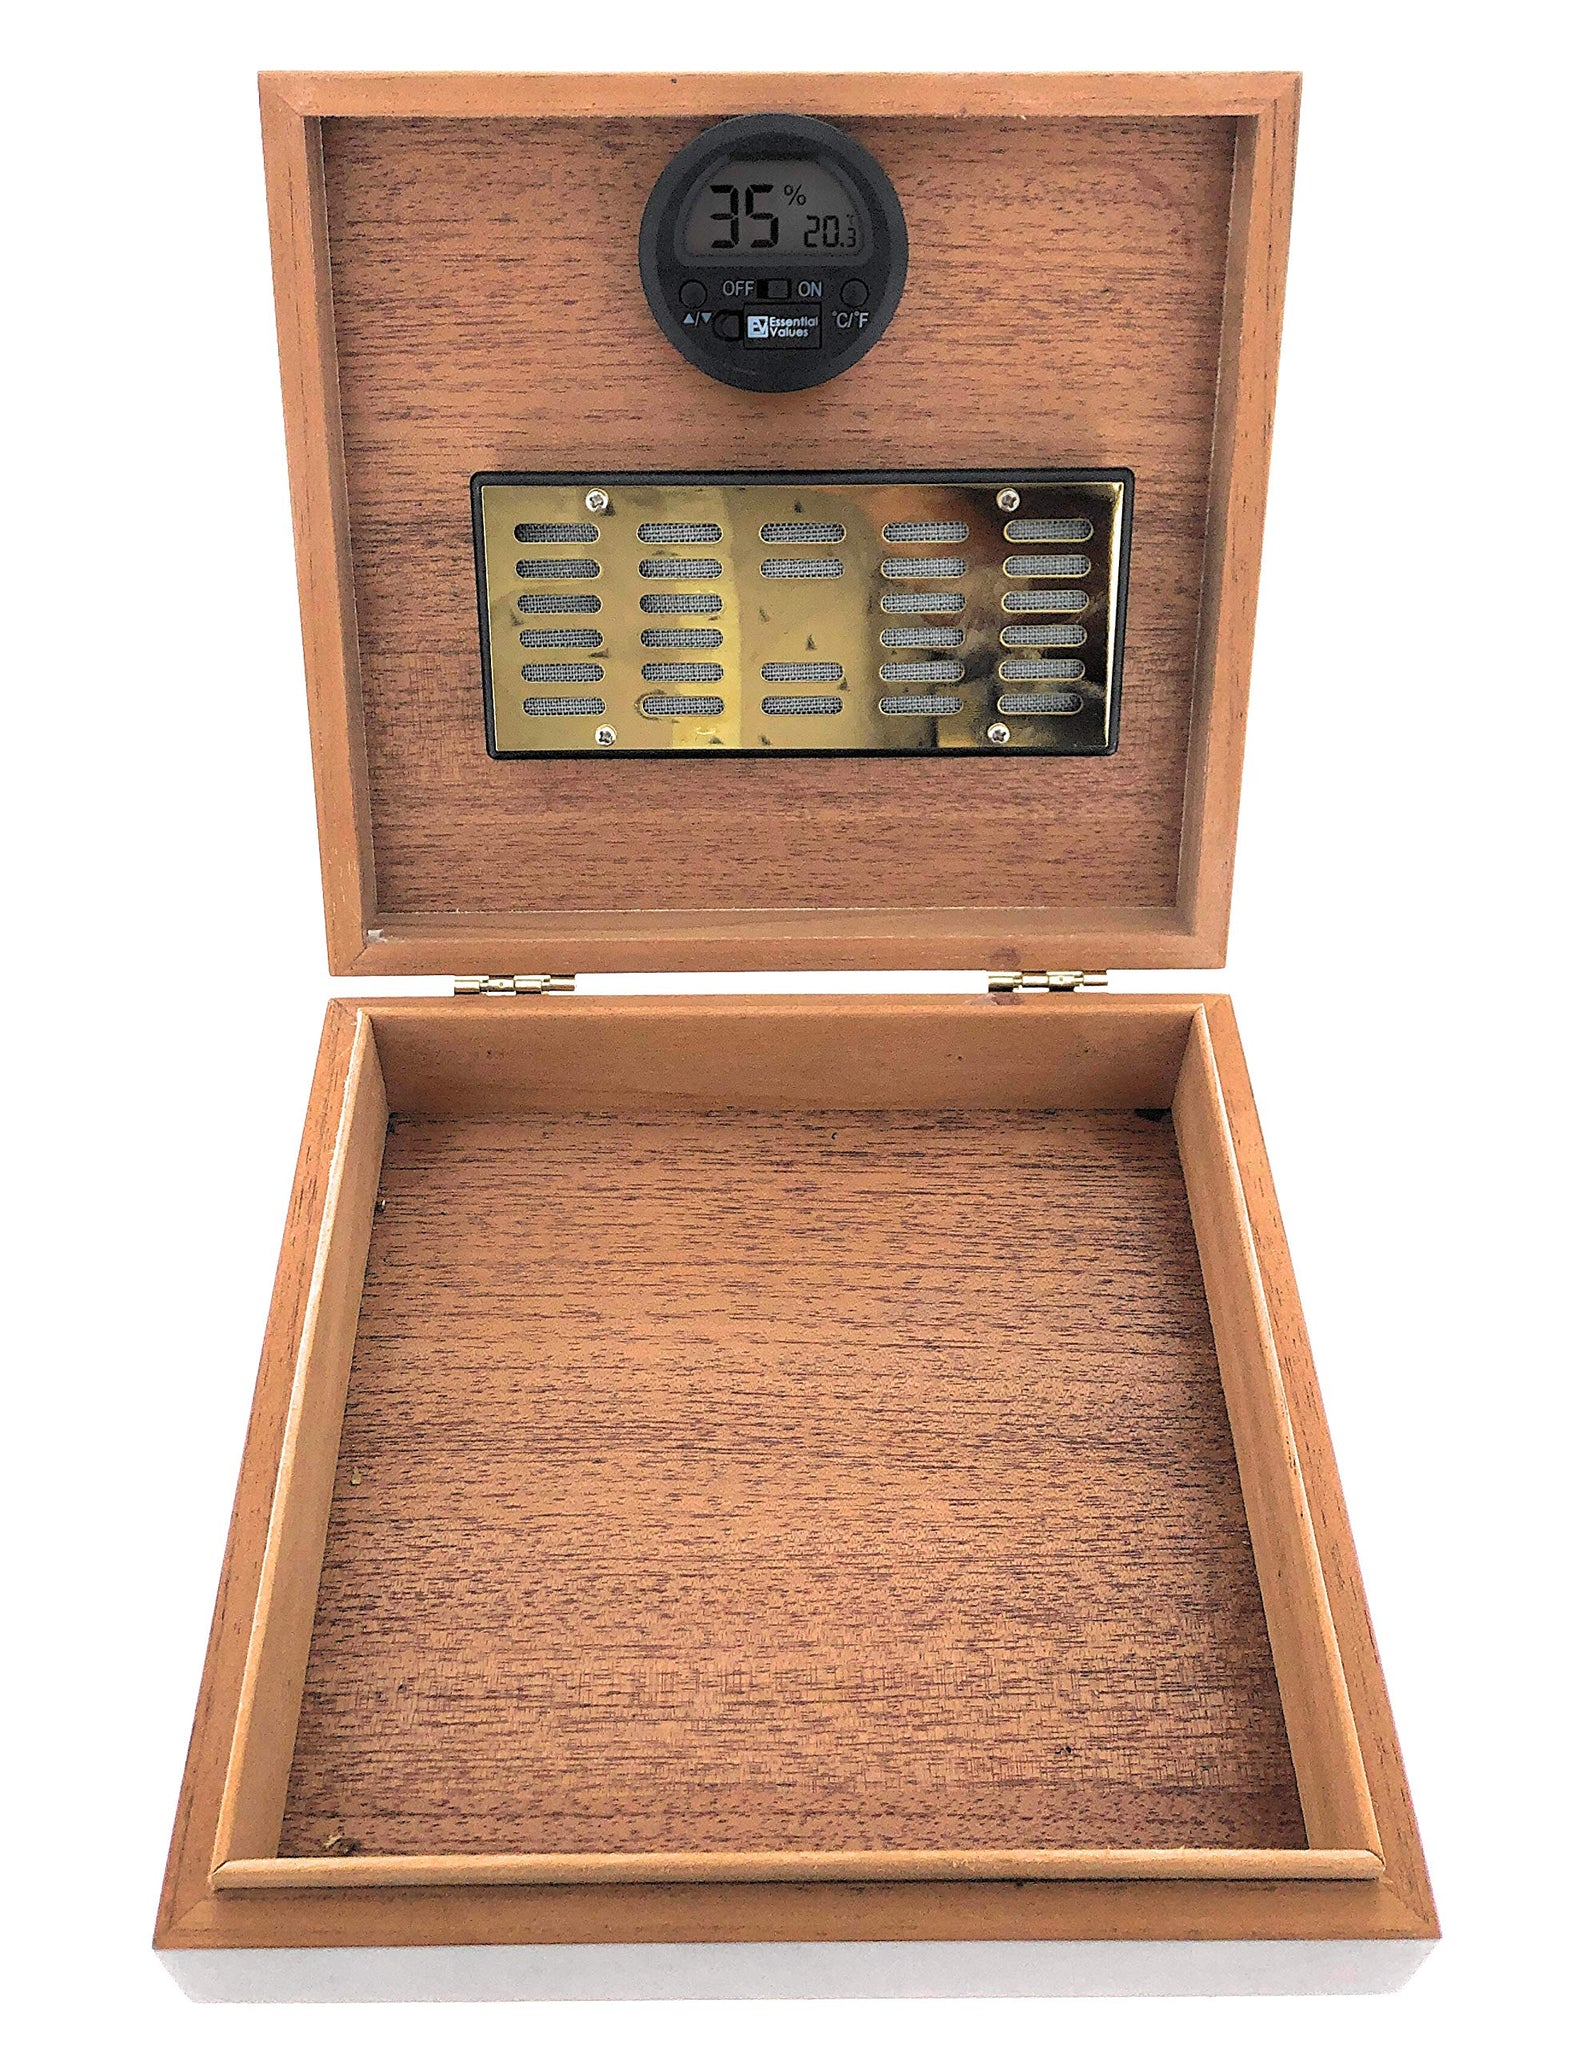 Essential Values Round Digital Cigar Hygrometer for Humidors